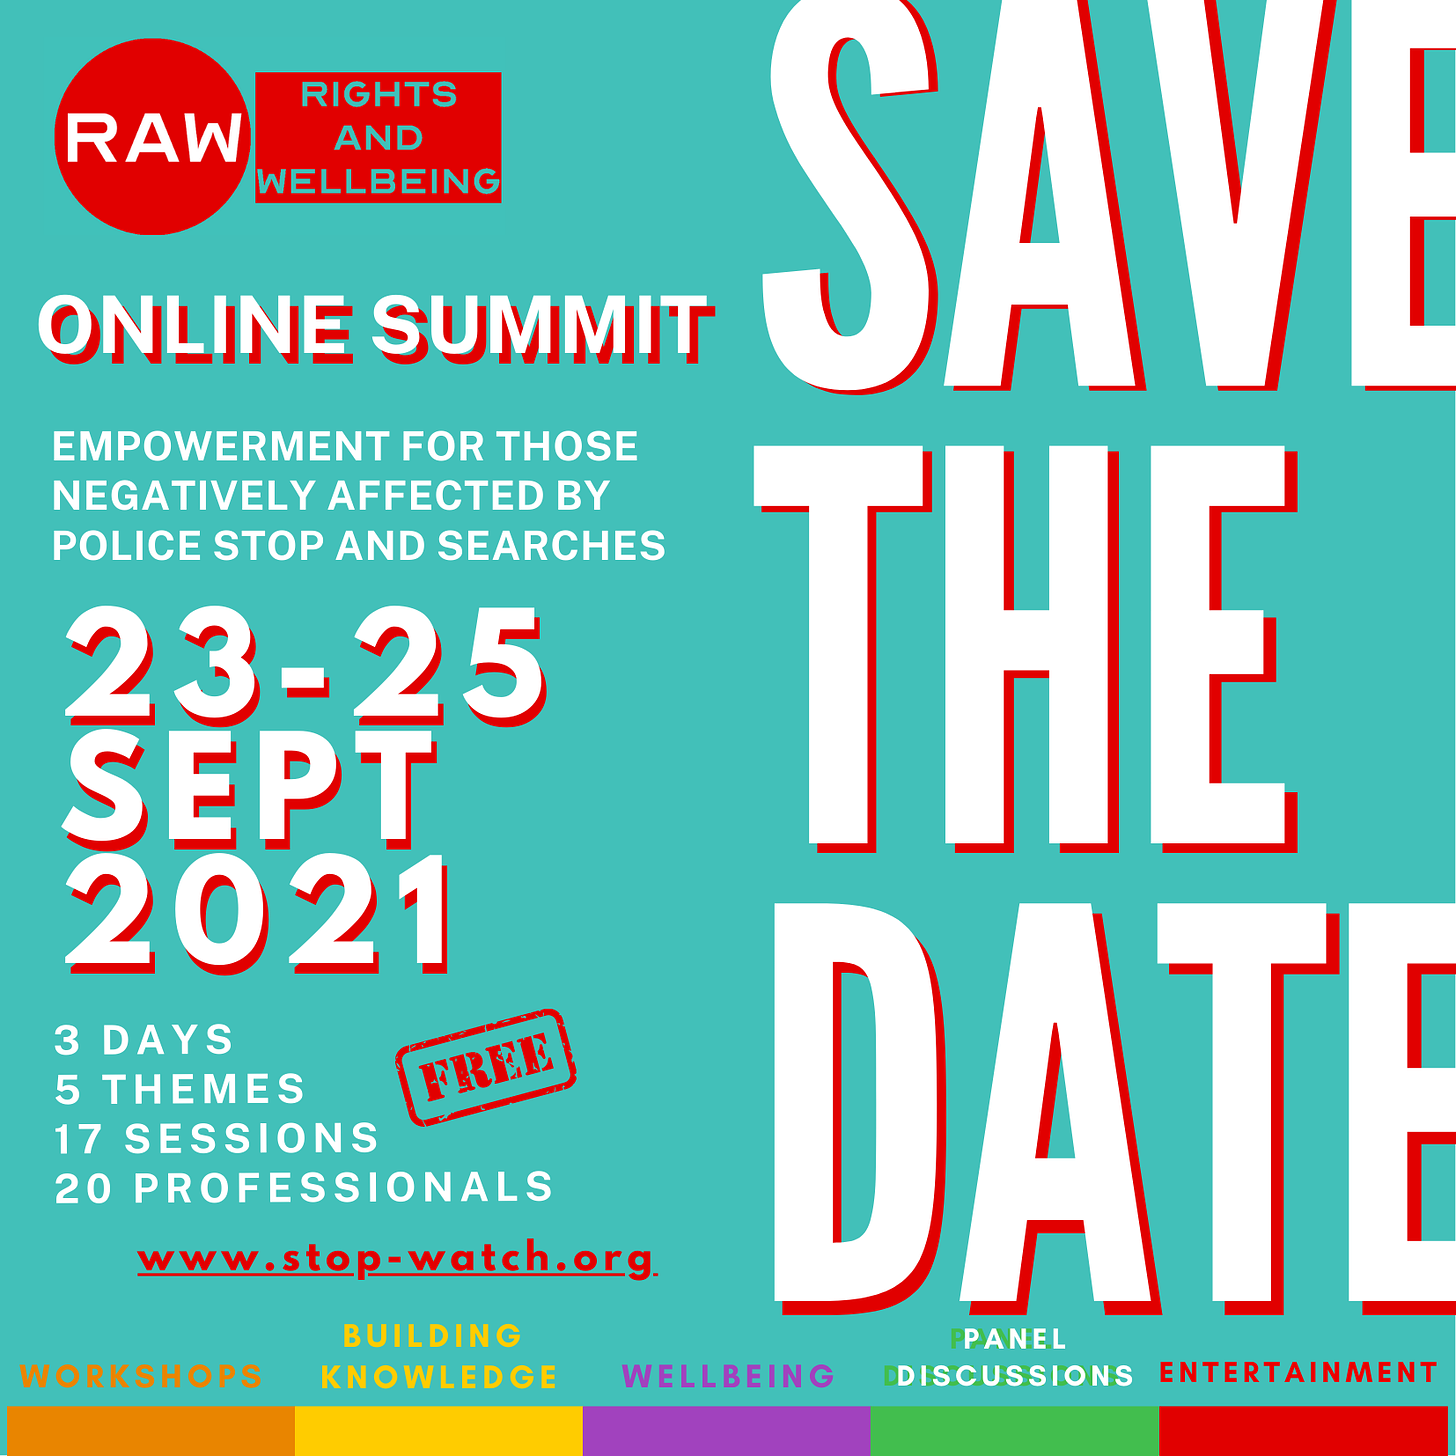 SAVE THE DATE poster: Rights and Wellbeing online summit runs from 23 to 25 September 2021